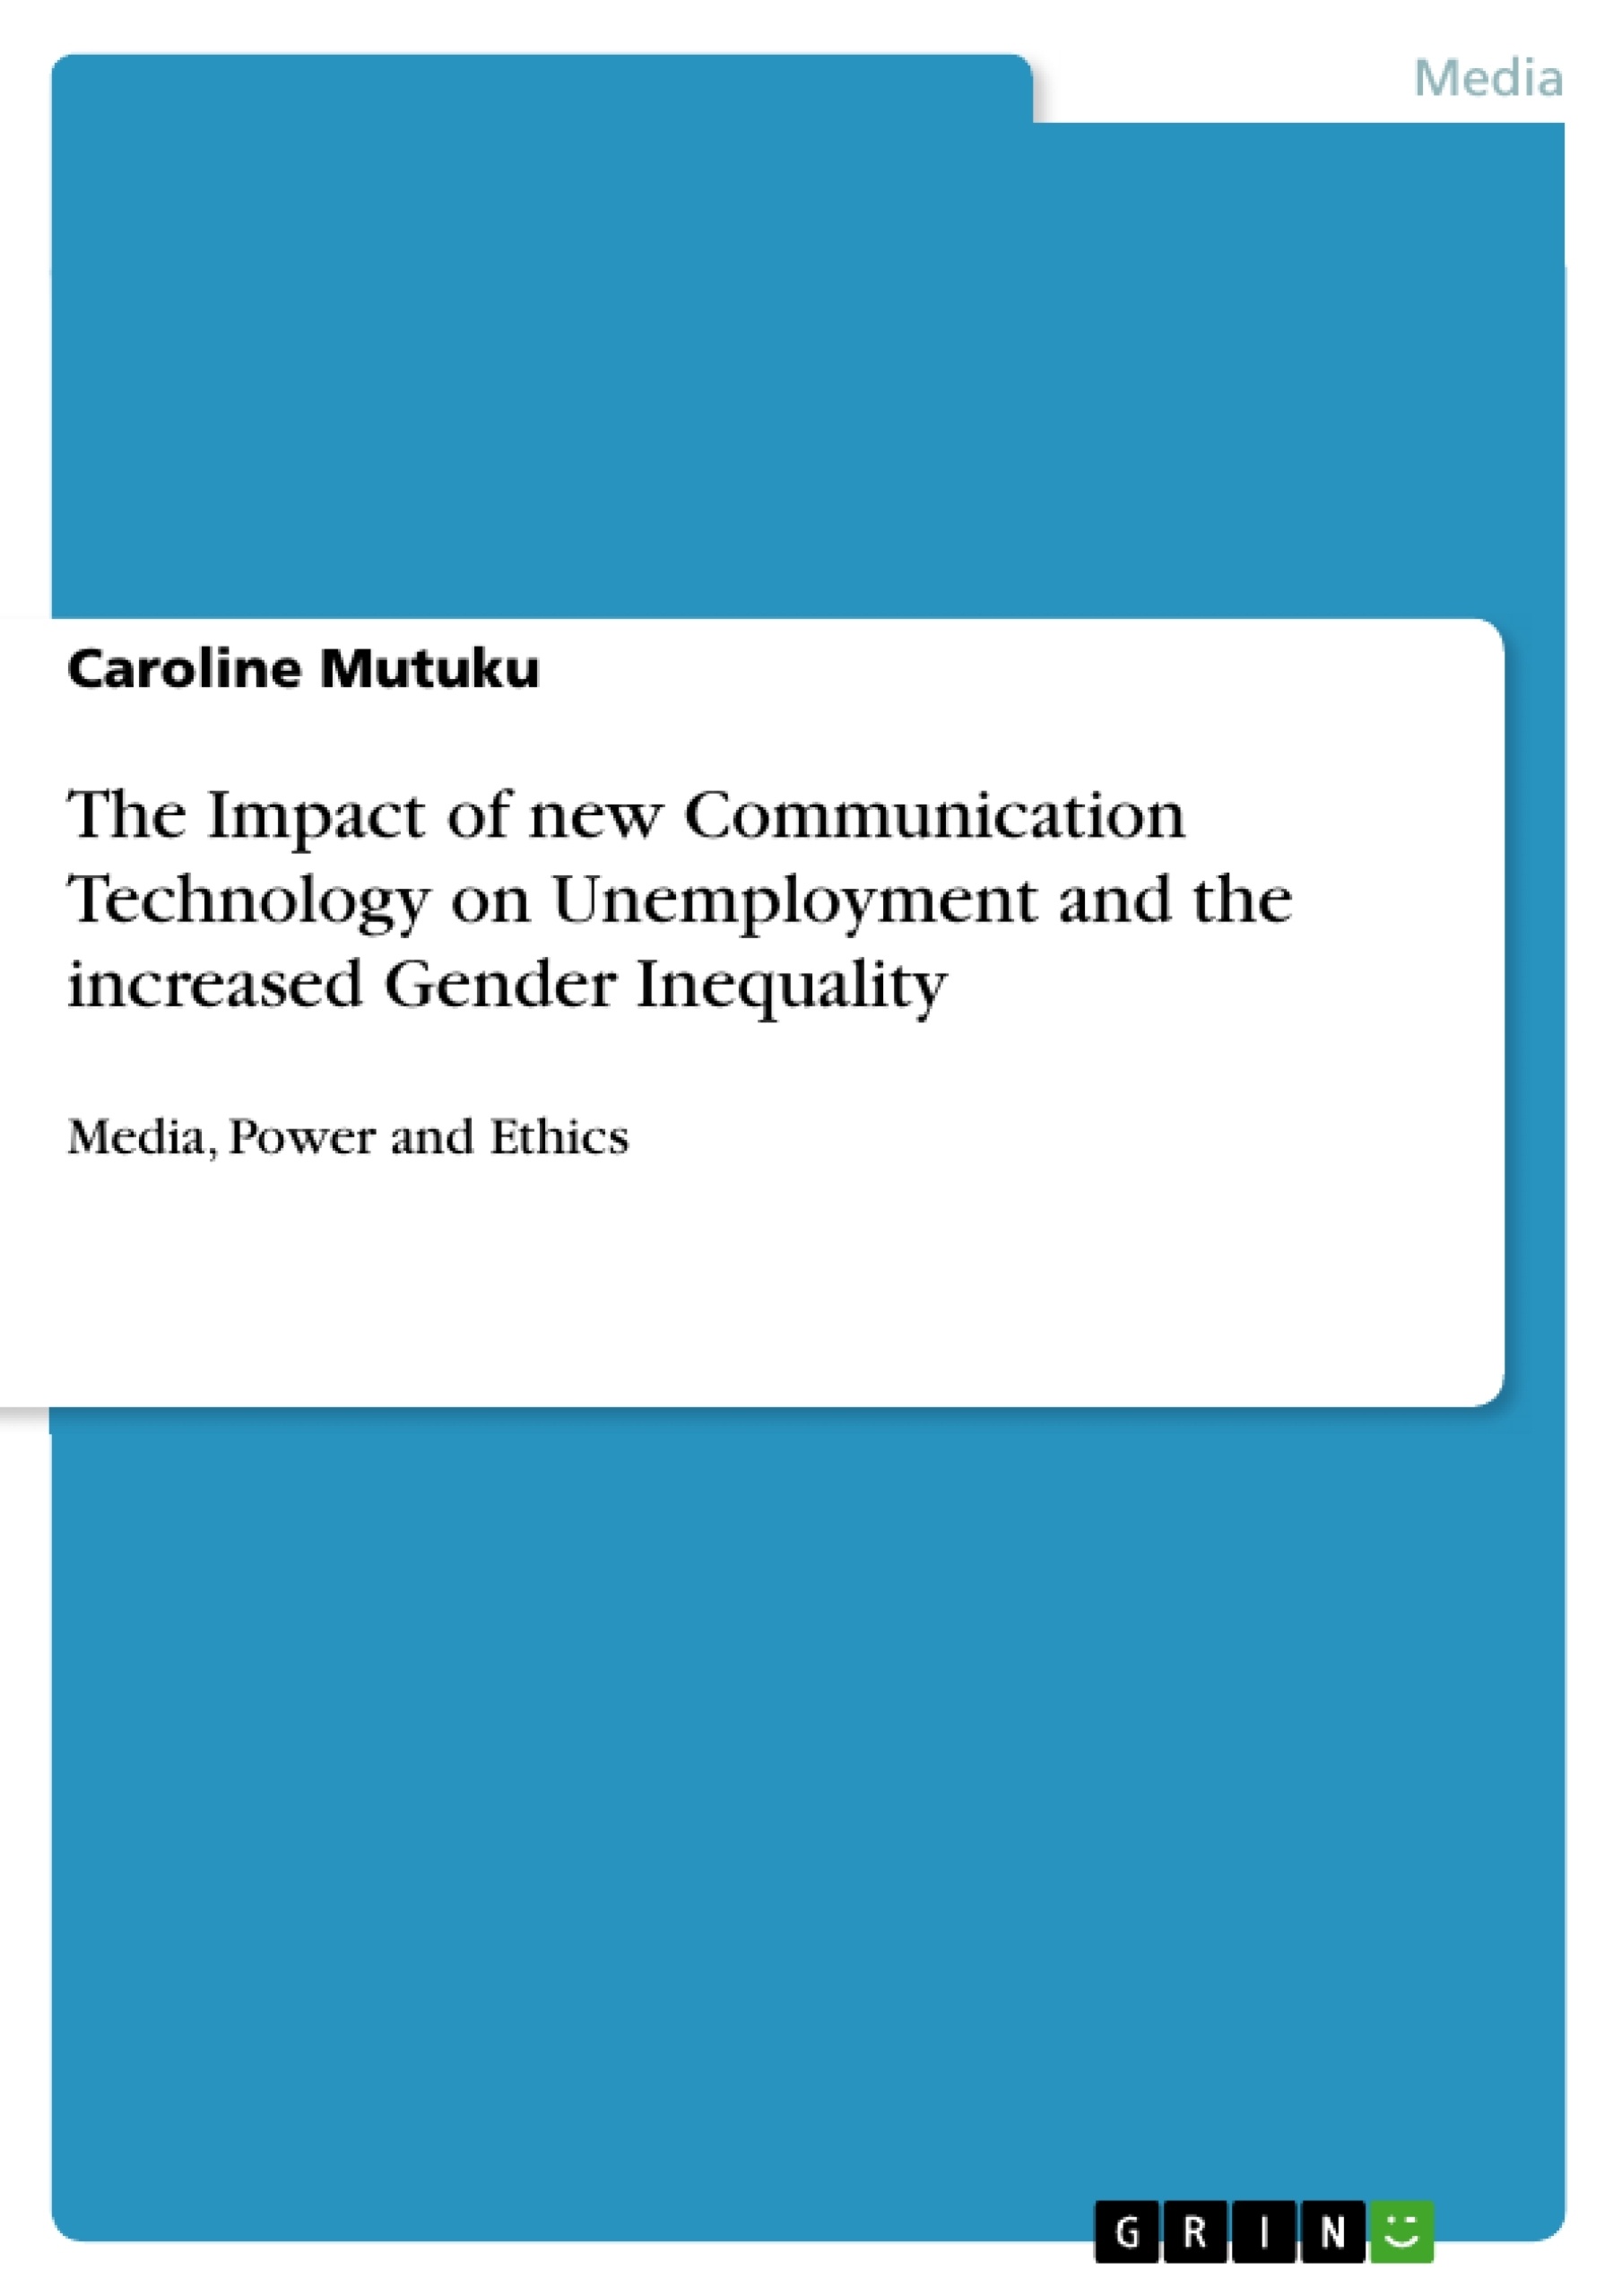 Titre: The Impact of new Communication Technology on Unemployment and the increased Gender Inequality